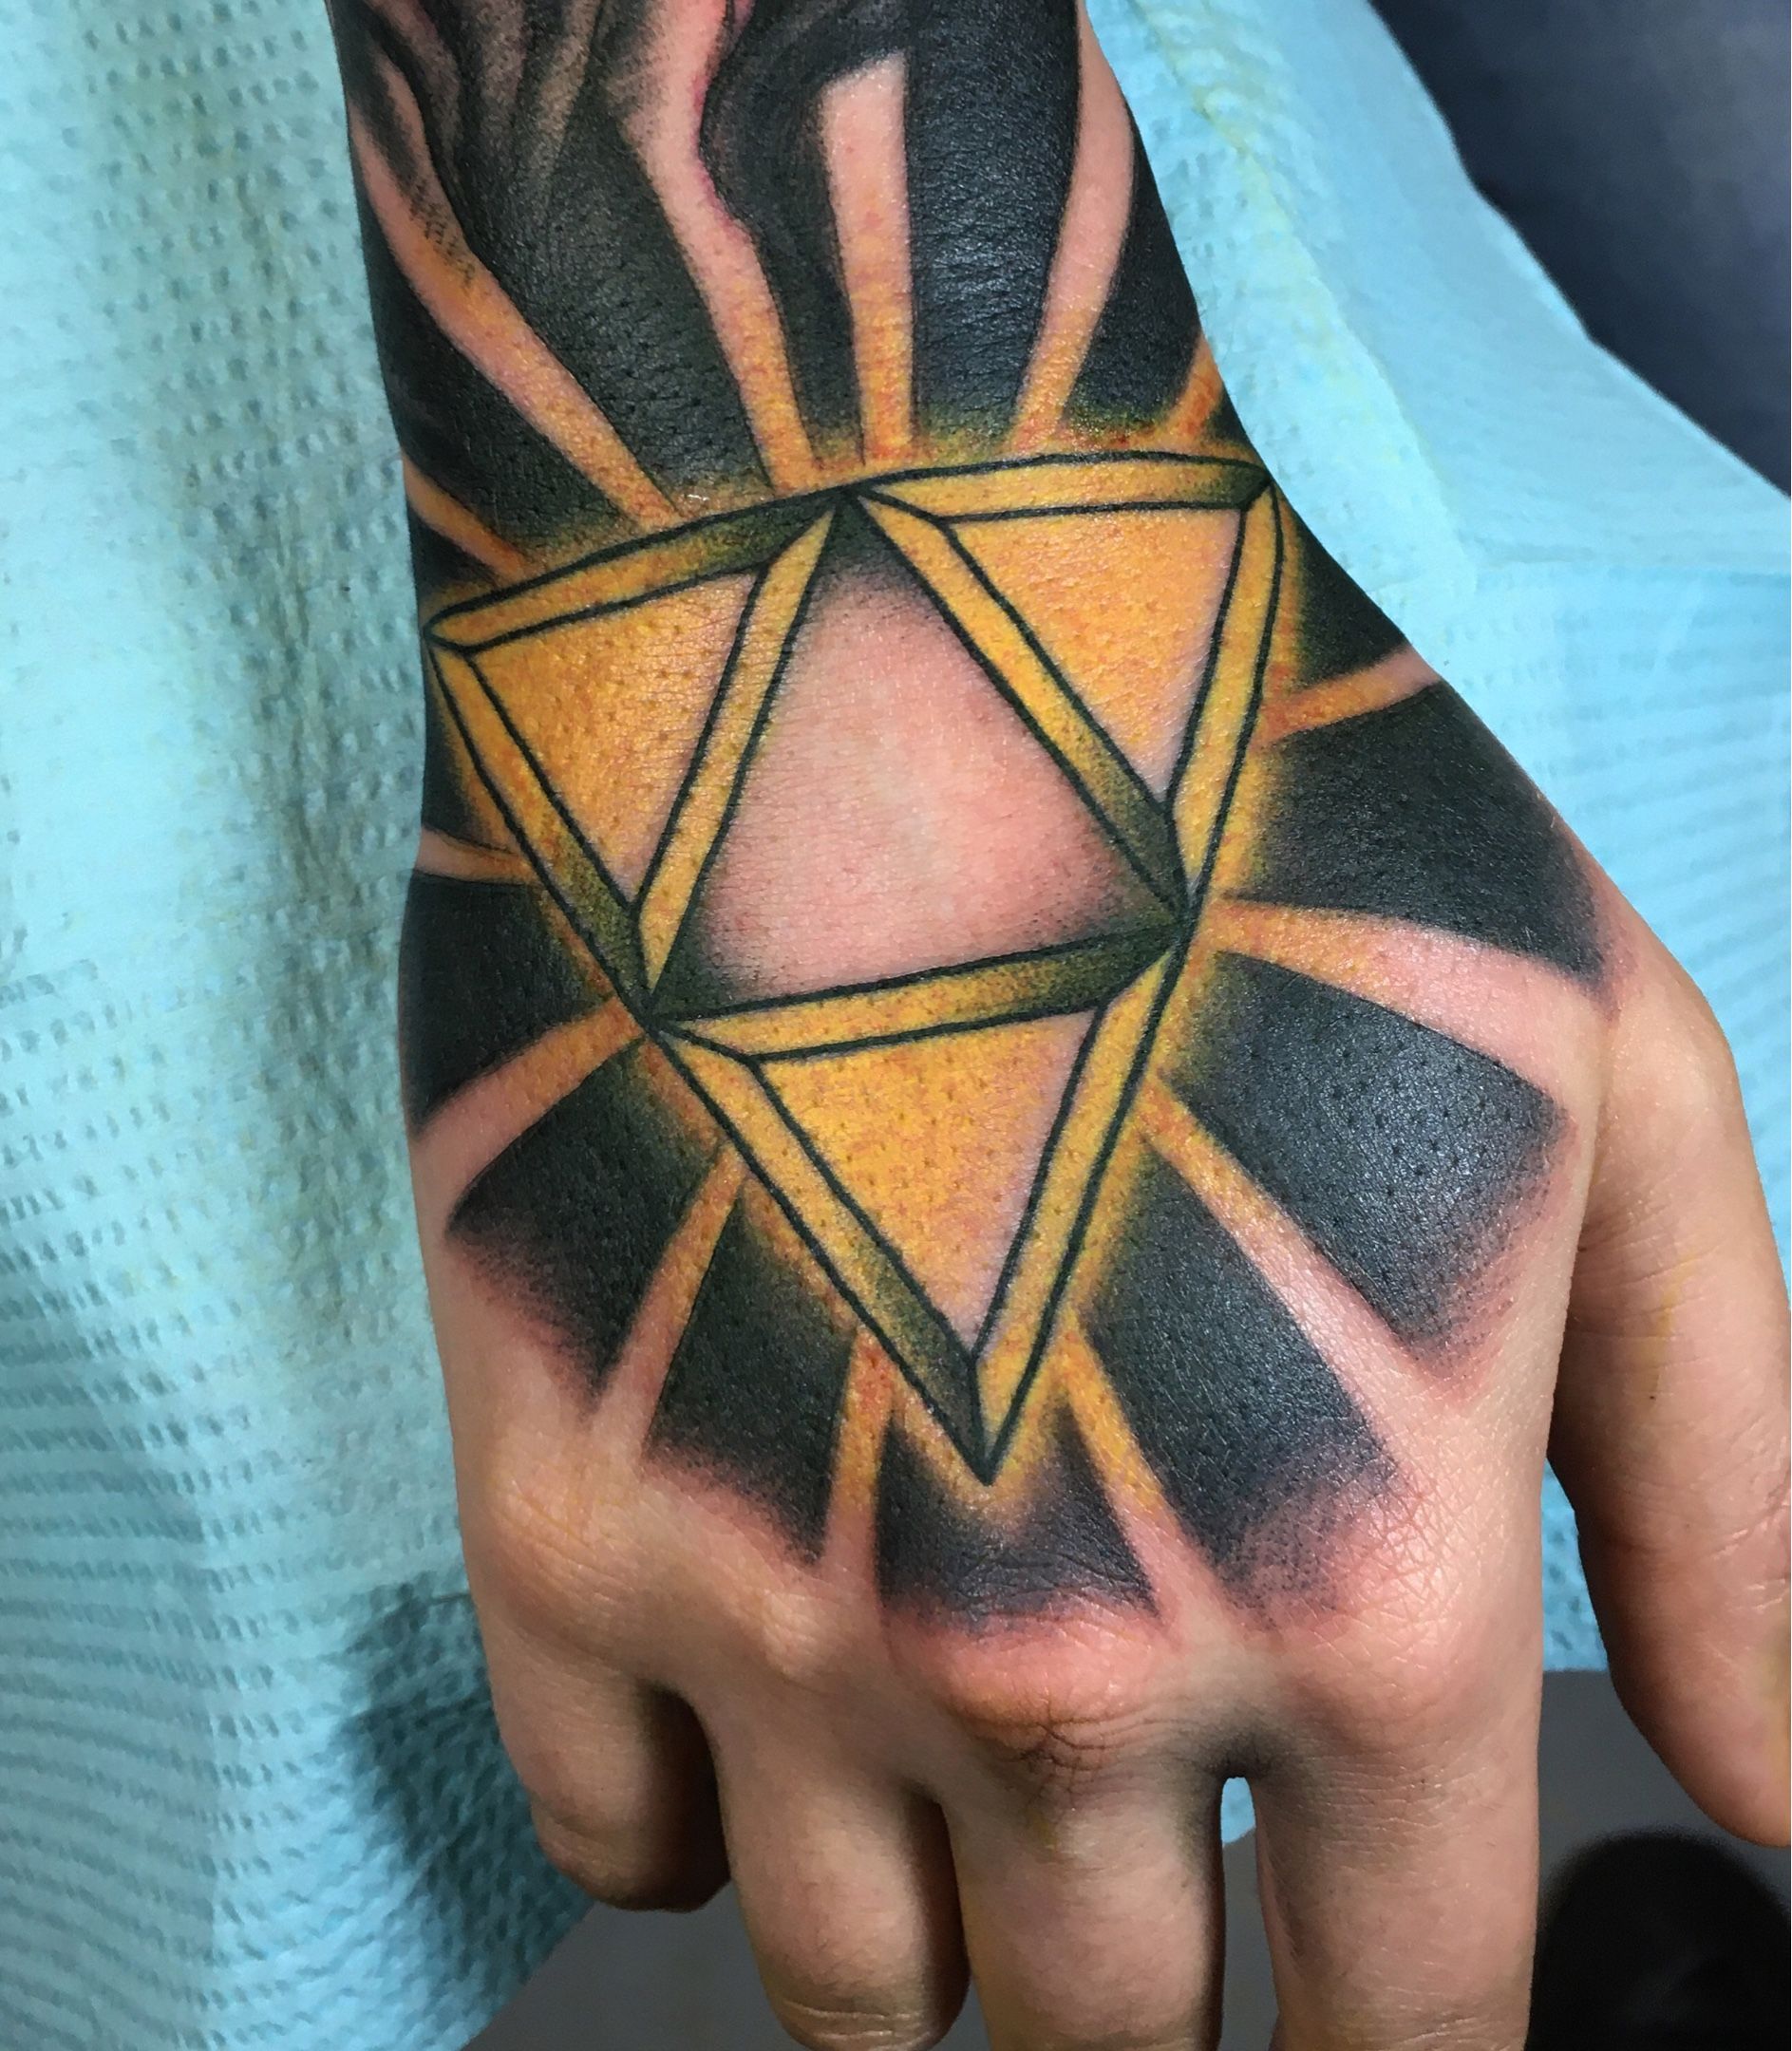 Justin Hauck Tattoo Artist  Happy Triforce Tuesday  Facebook